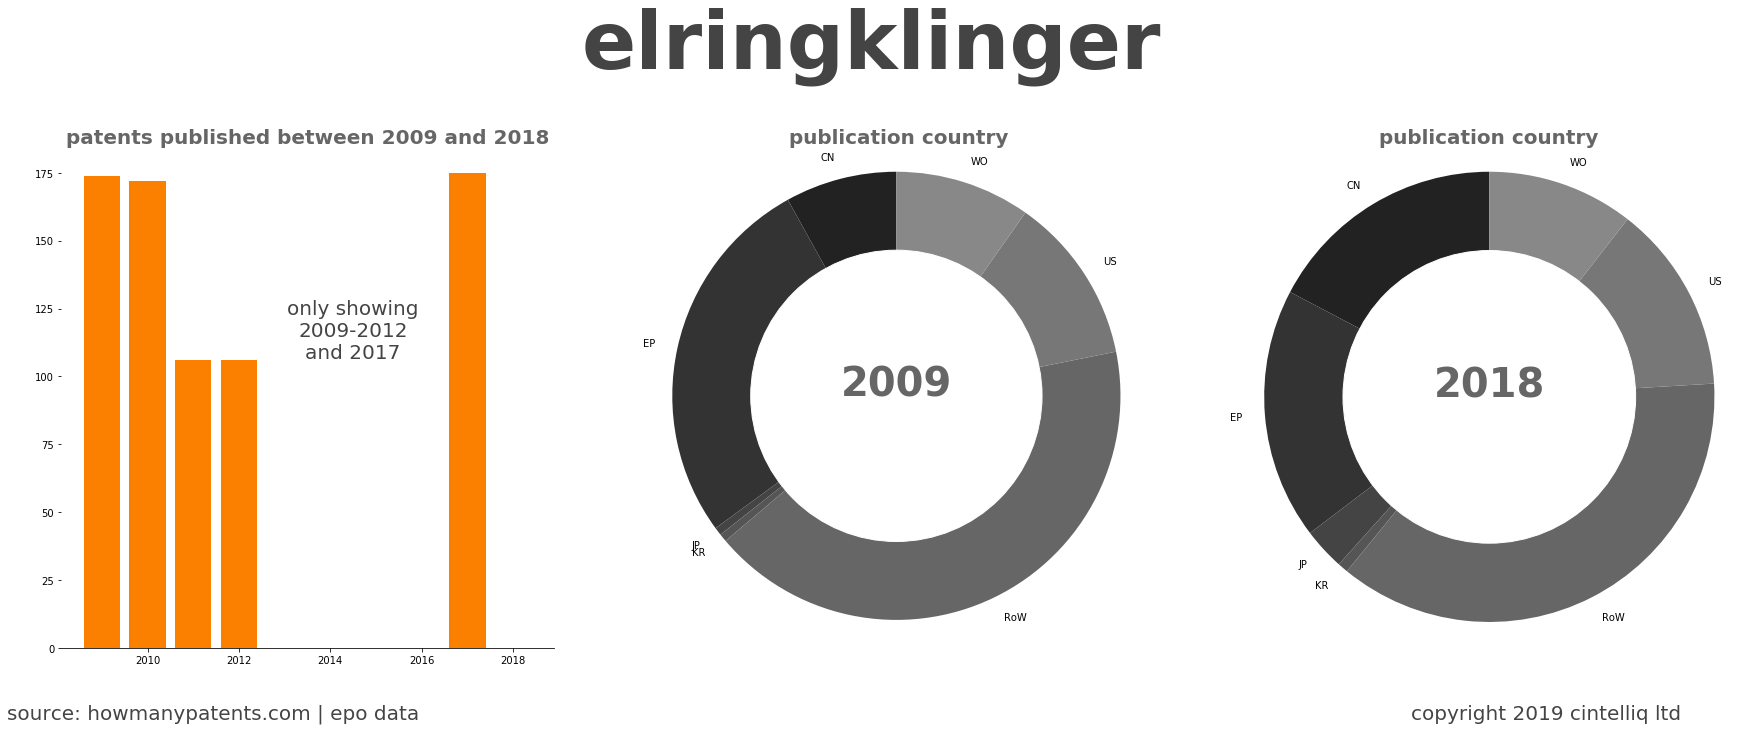 summary of patents for Elringklinger